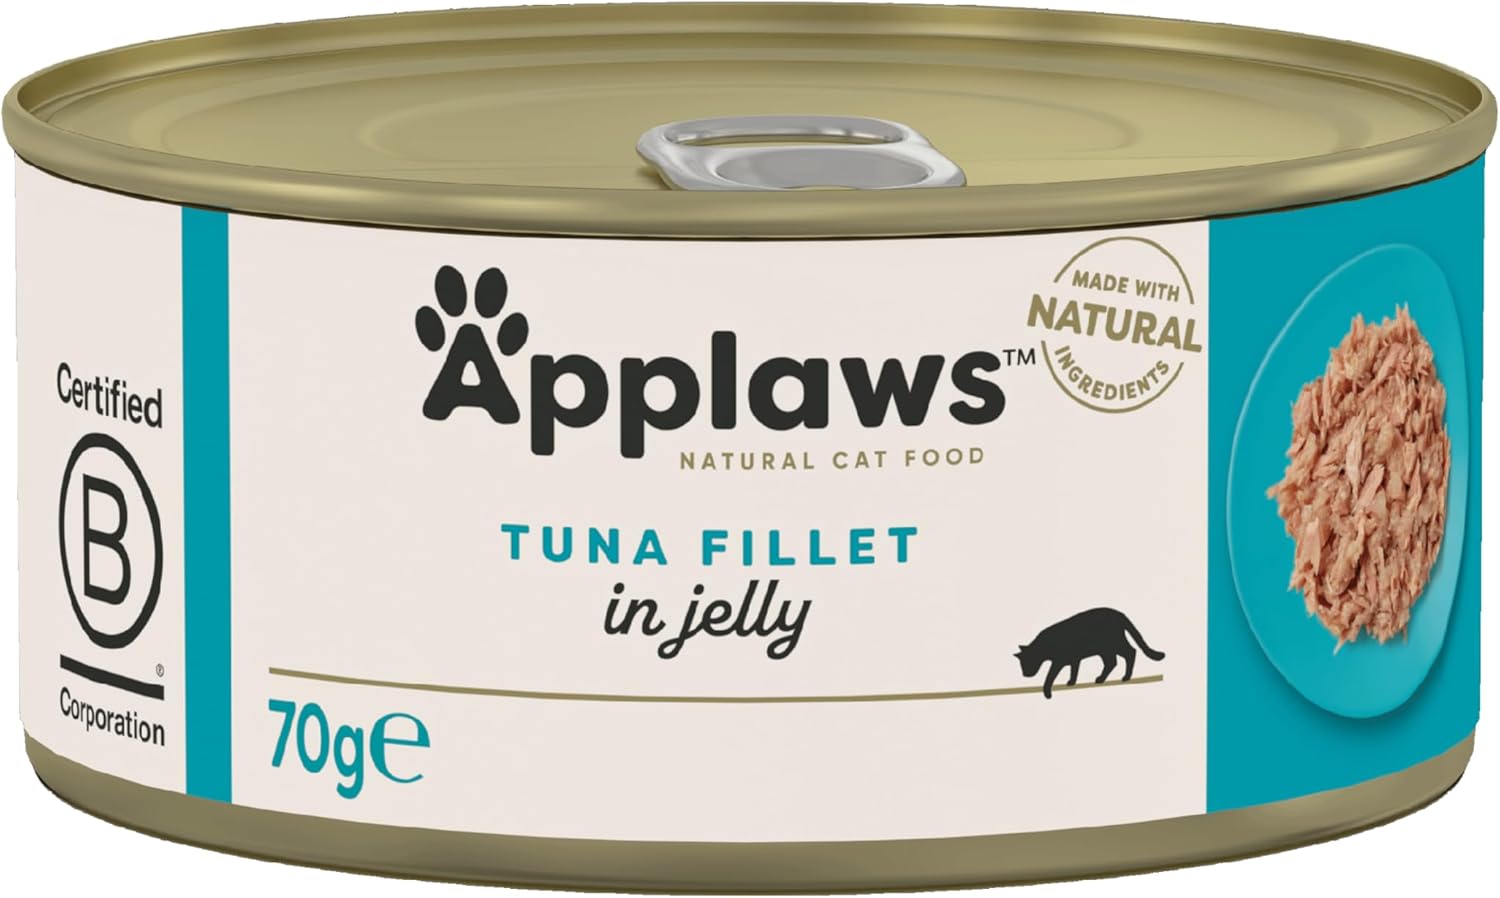 Applaws Natural Wet Cat Food, Tuna Fillet in Jelly 70 g Tin, (24 x 70 g Tins)?1046CE-A